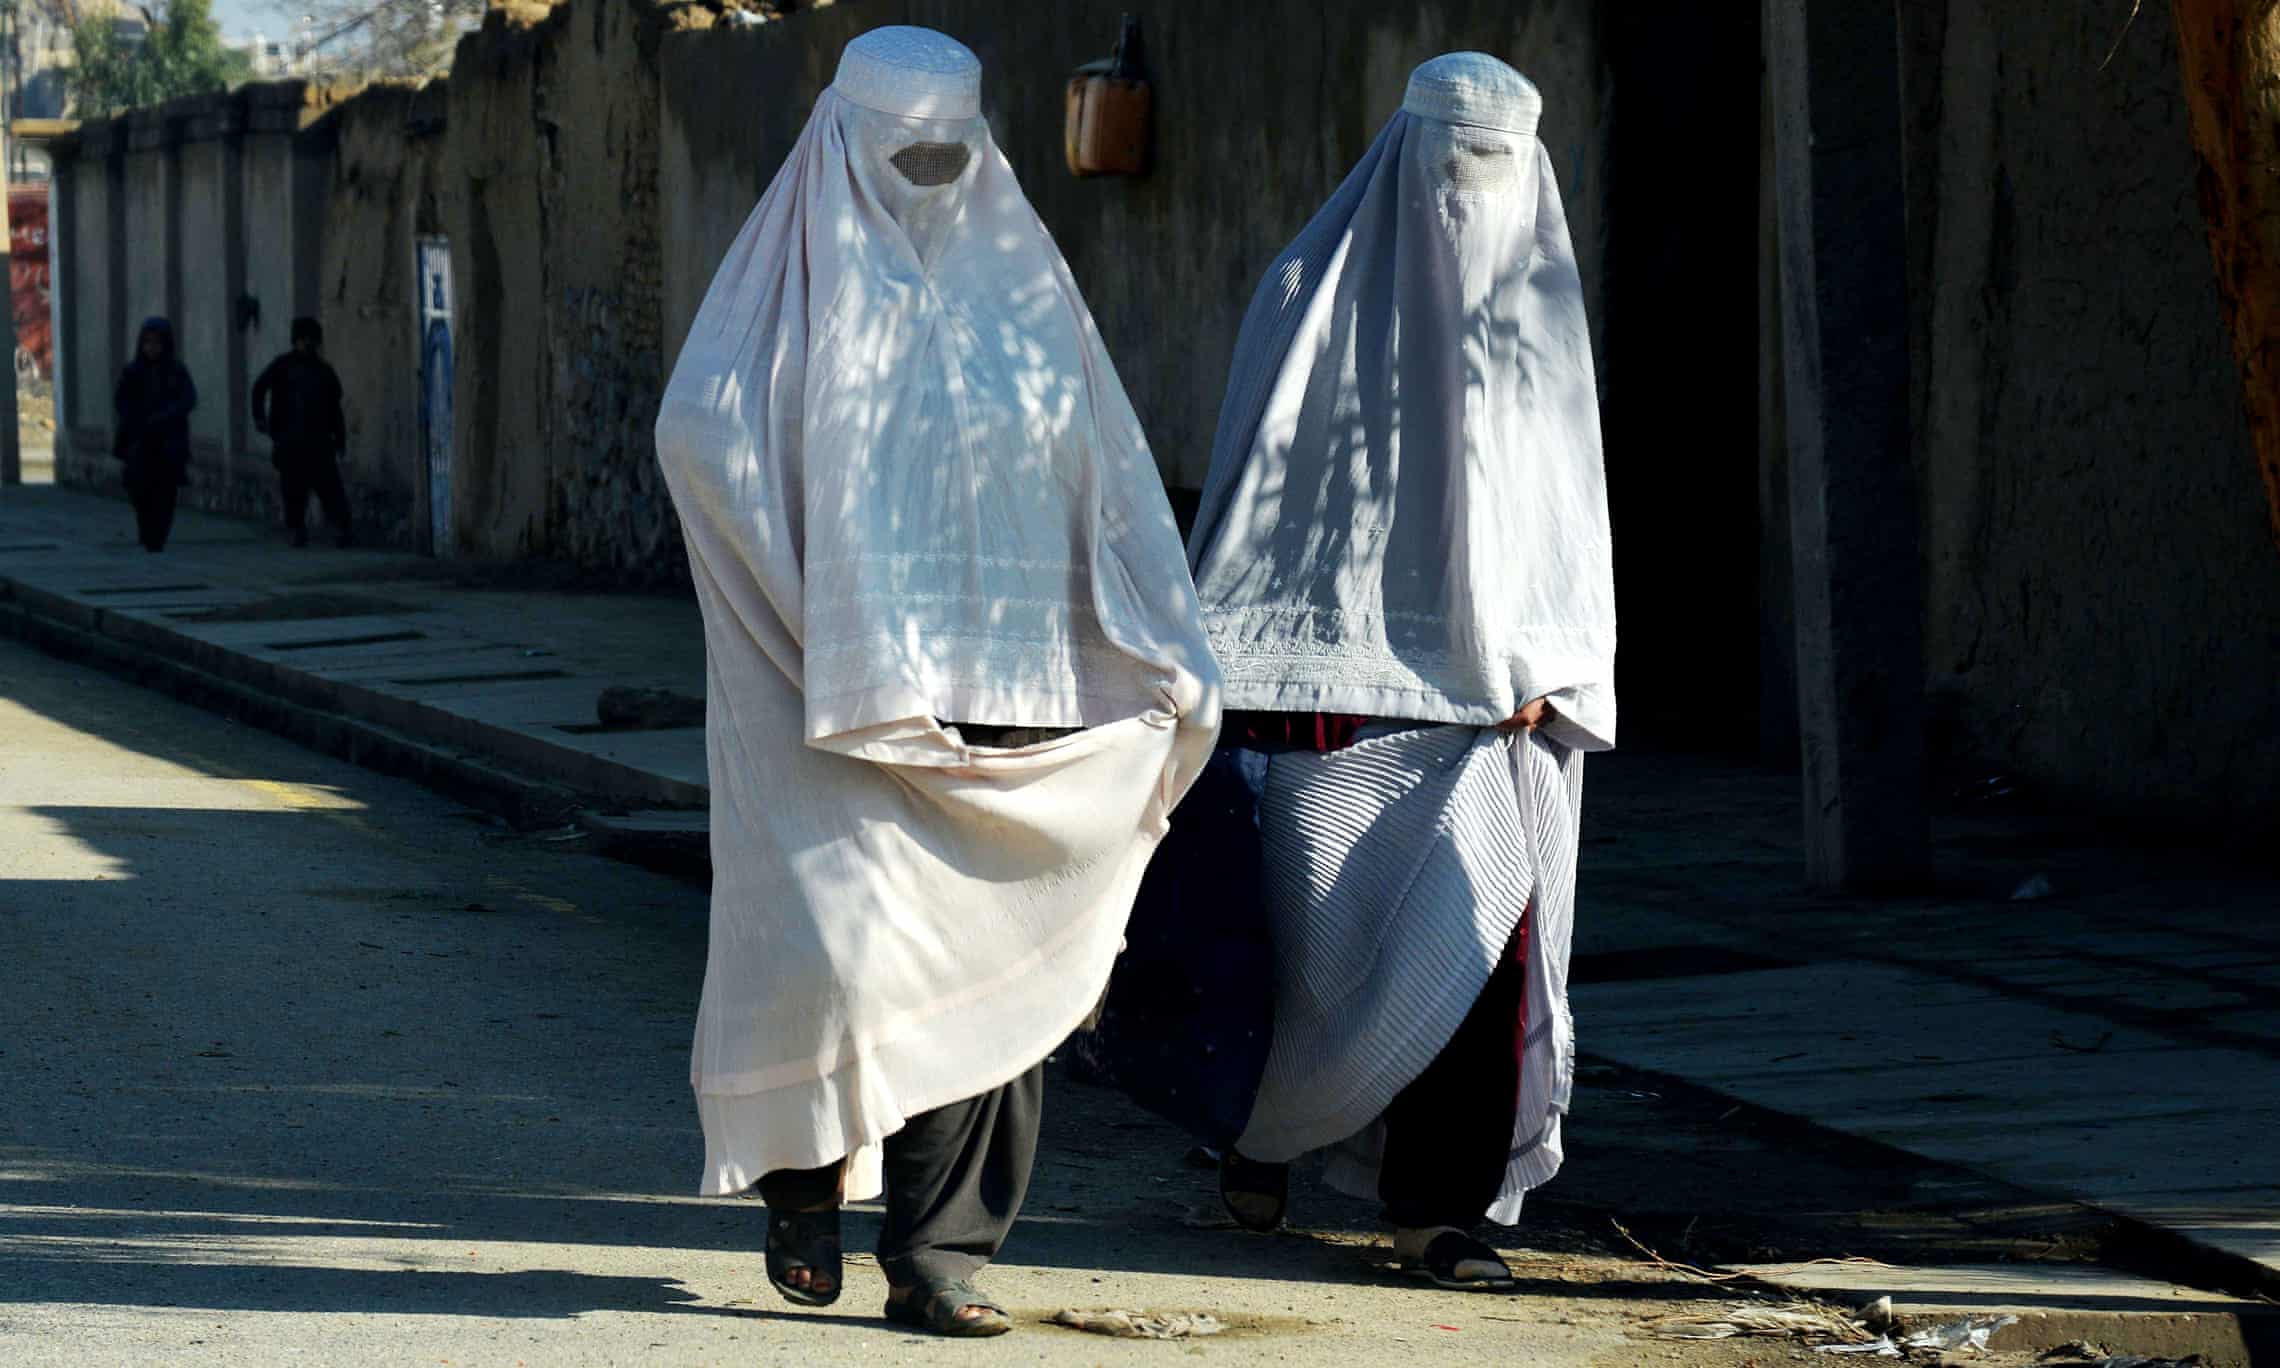 Stoning women to death comes back in Afghanistan